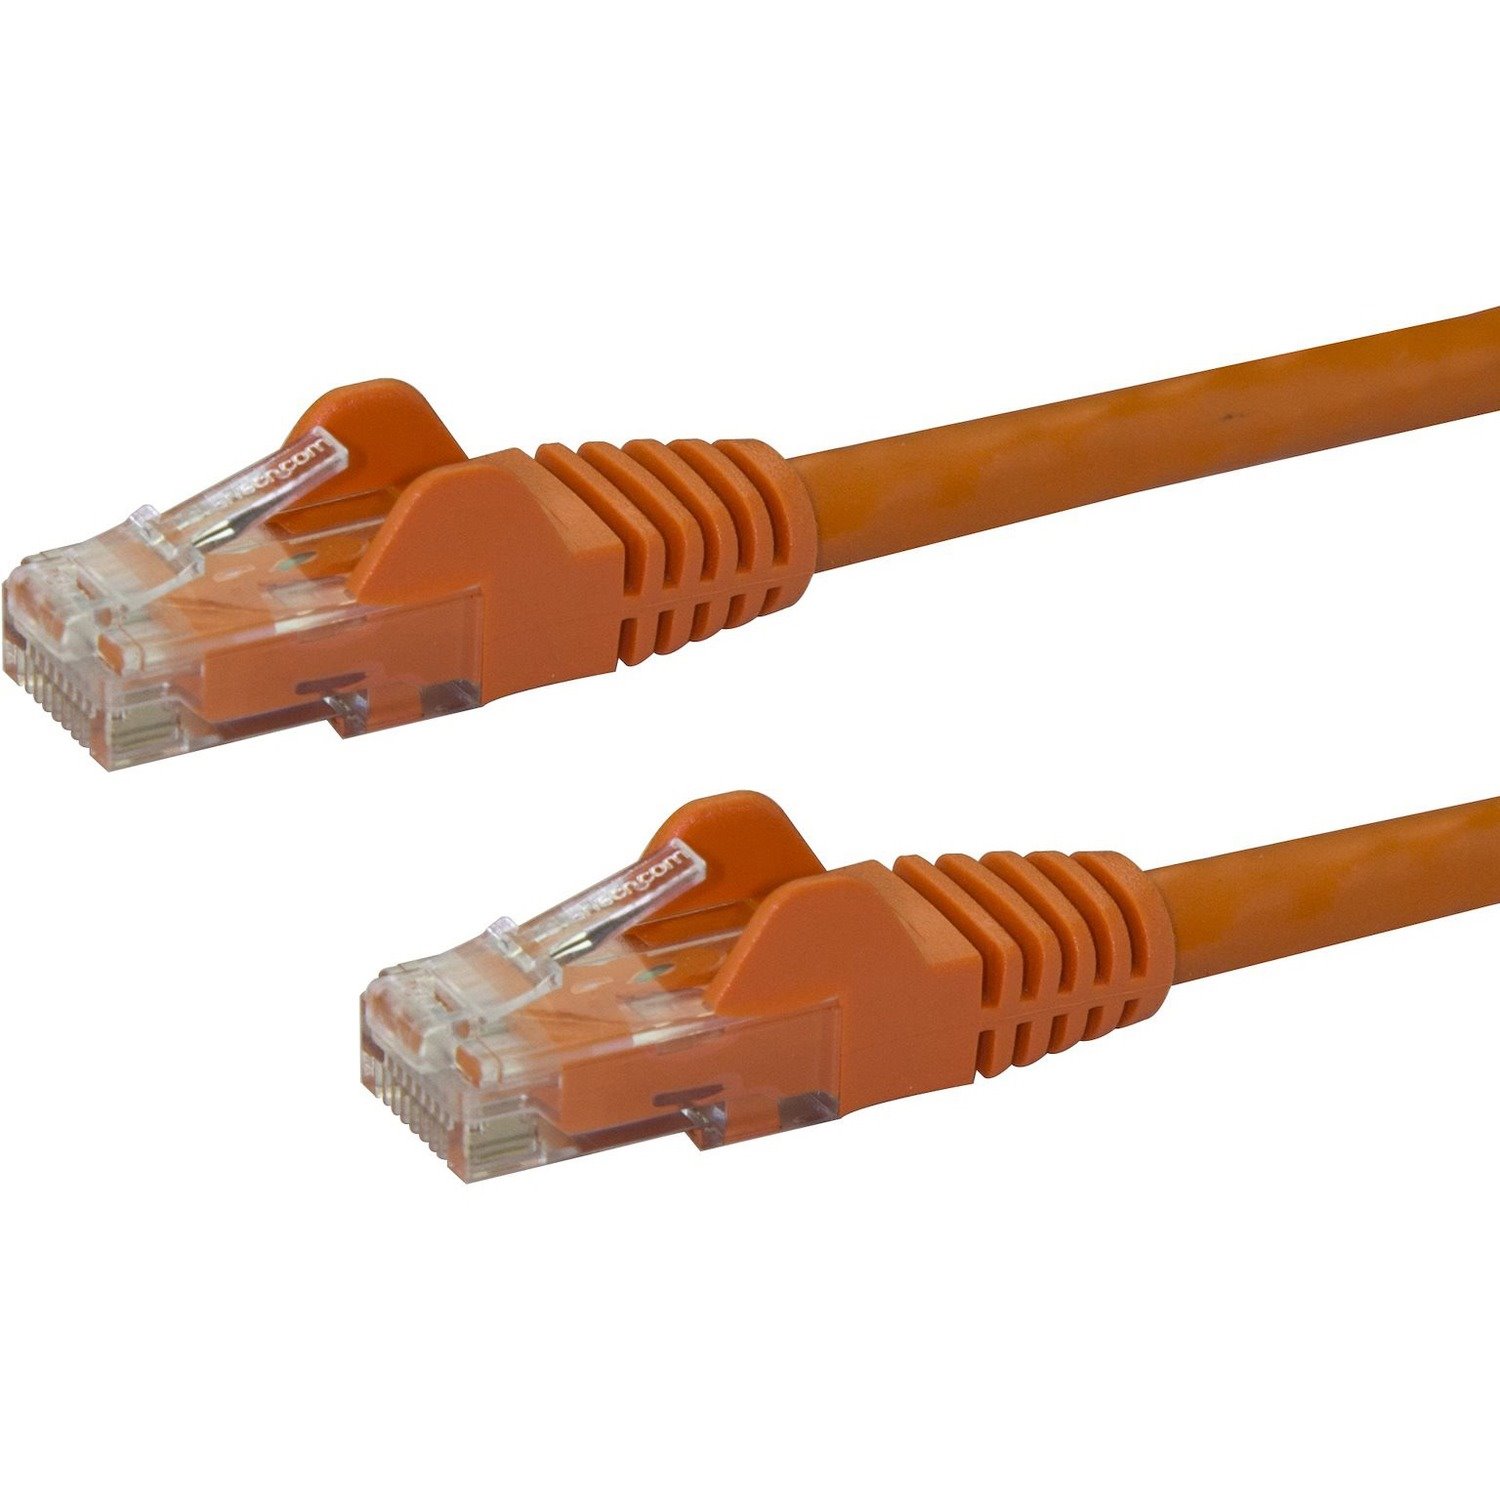 StarTech.com 14ft CAT6 Ethernet Cable - Orange Snagless Gigabit - 100W PoE UTP 650MHz Category 6 Patch Cord UL Certified Wiring/TIA